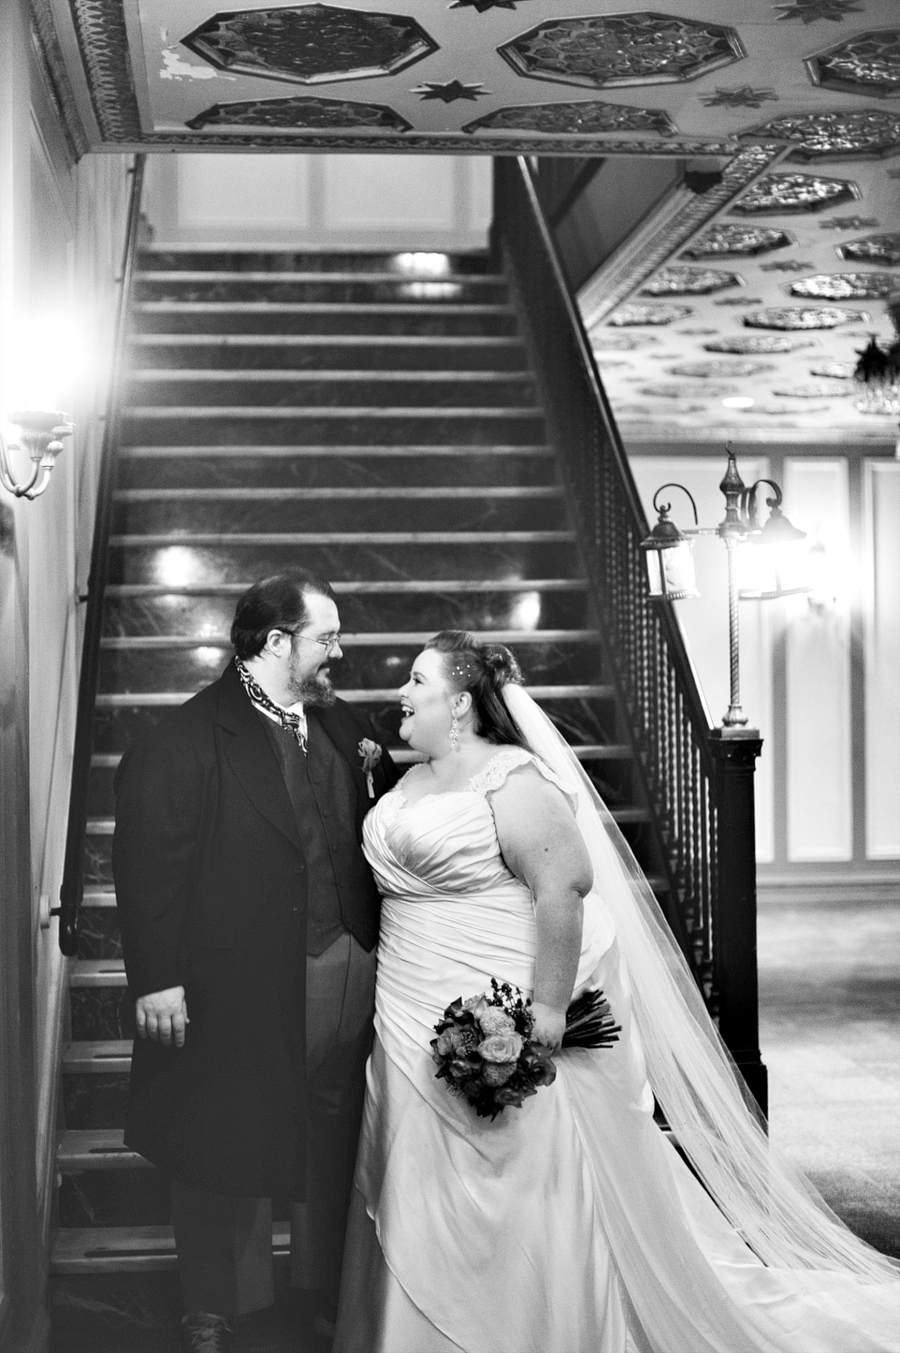 black and white wedding photo at santander performing arts center theater